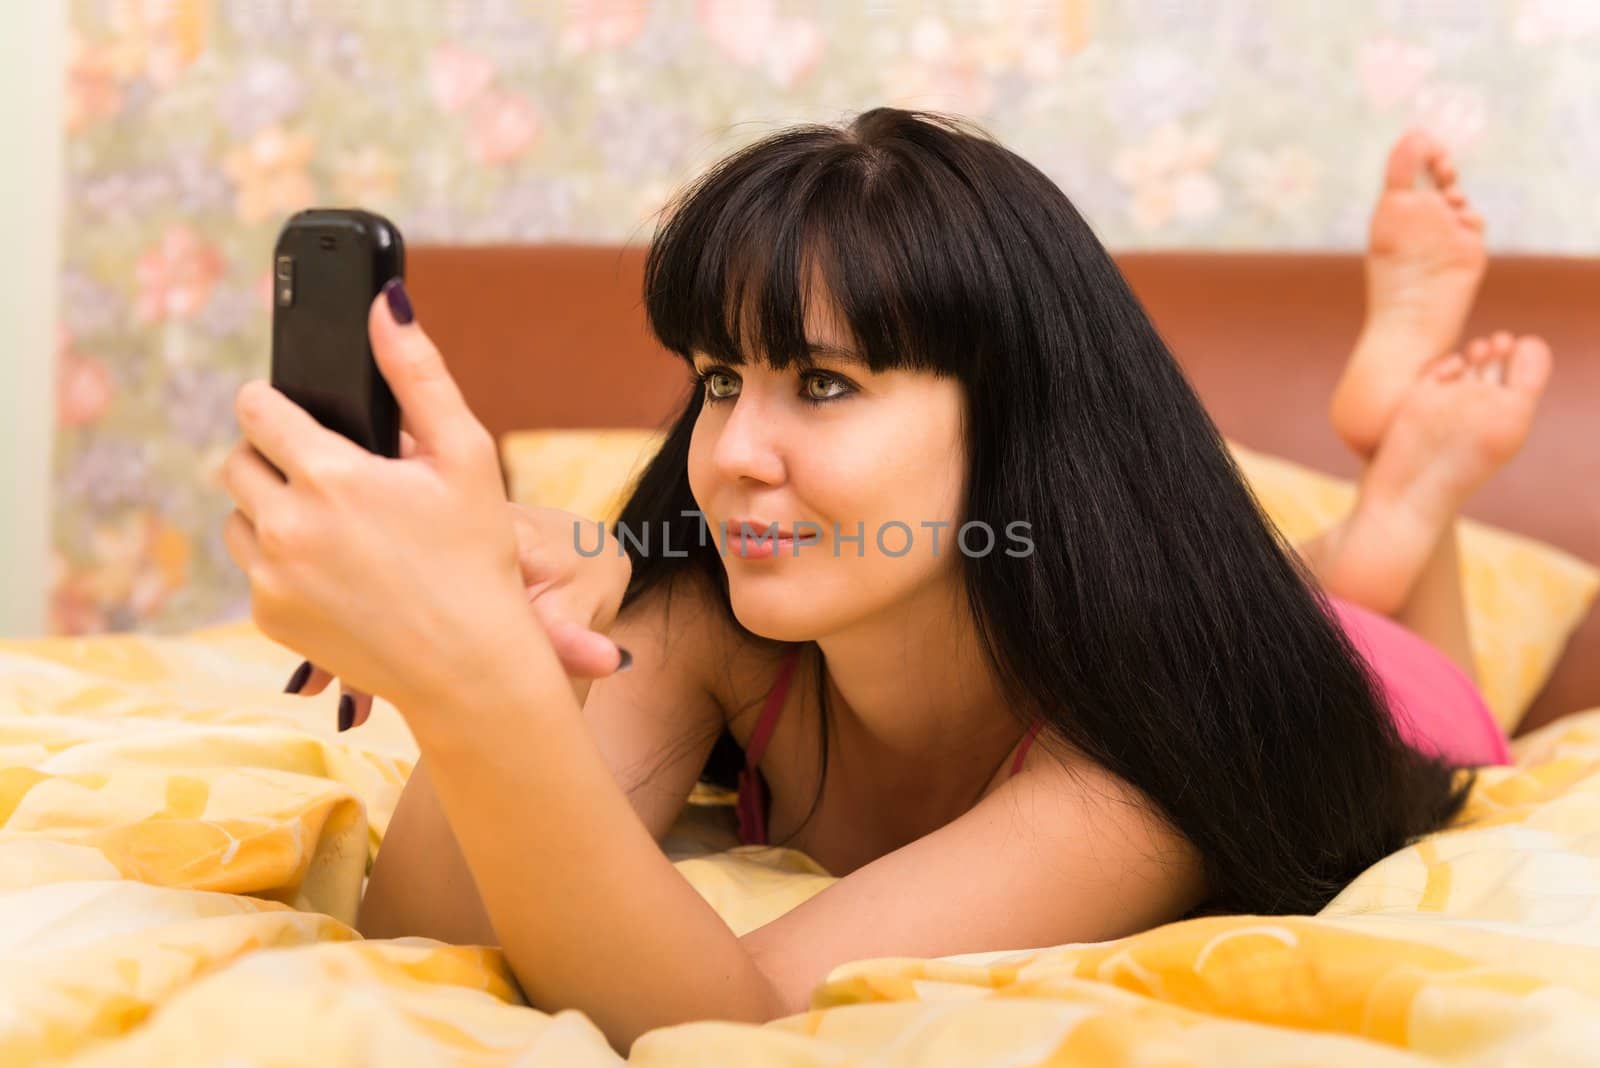 Smiling young woman with a mobile phone in bed